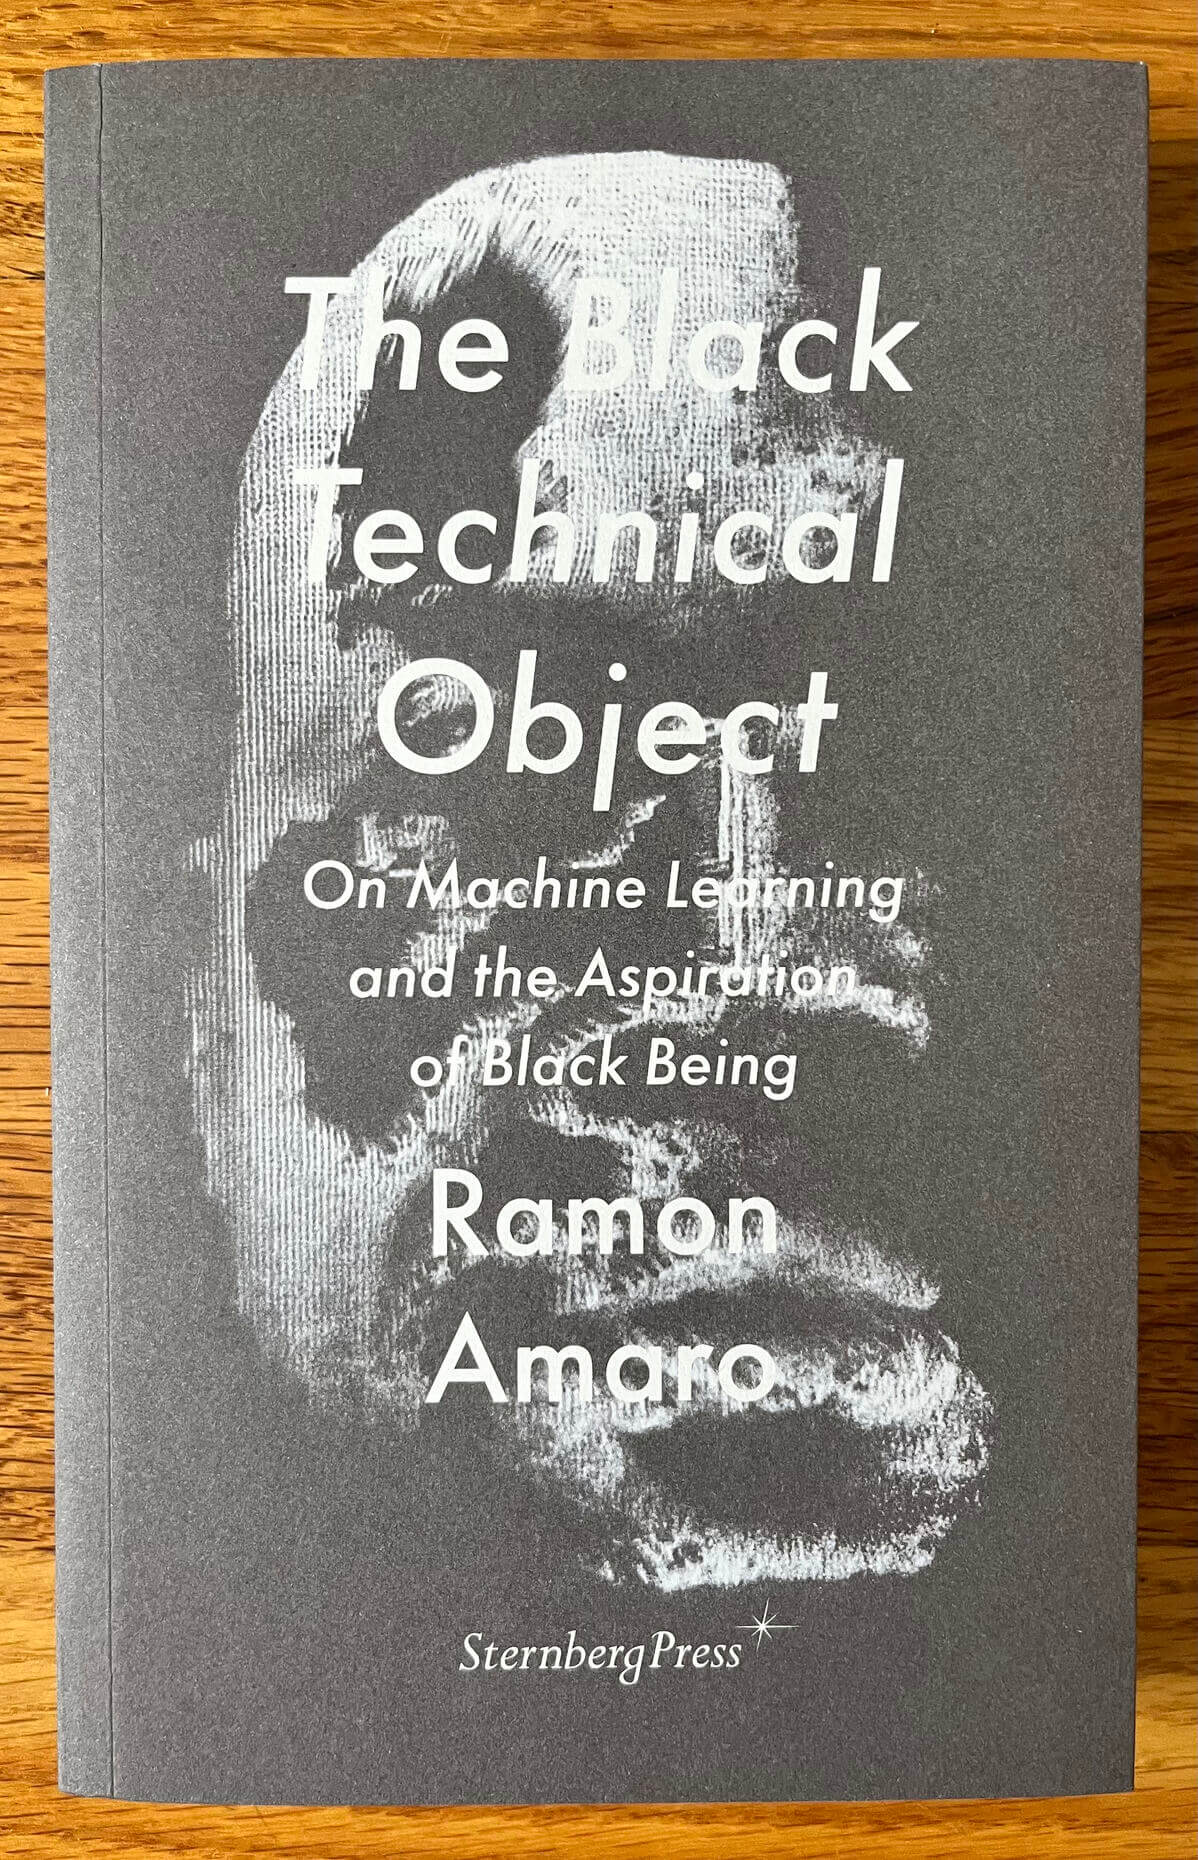 “The Black Technical Object: On Machine Learning and the Aspiration of Black Being” by Ramon Amaro